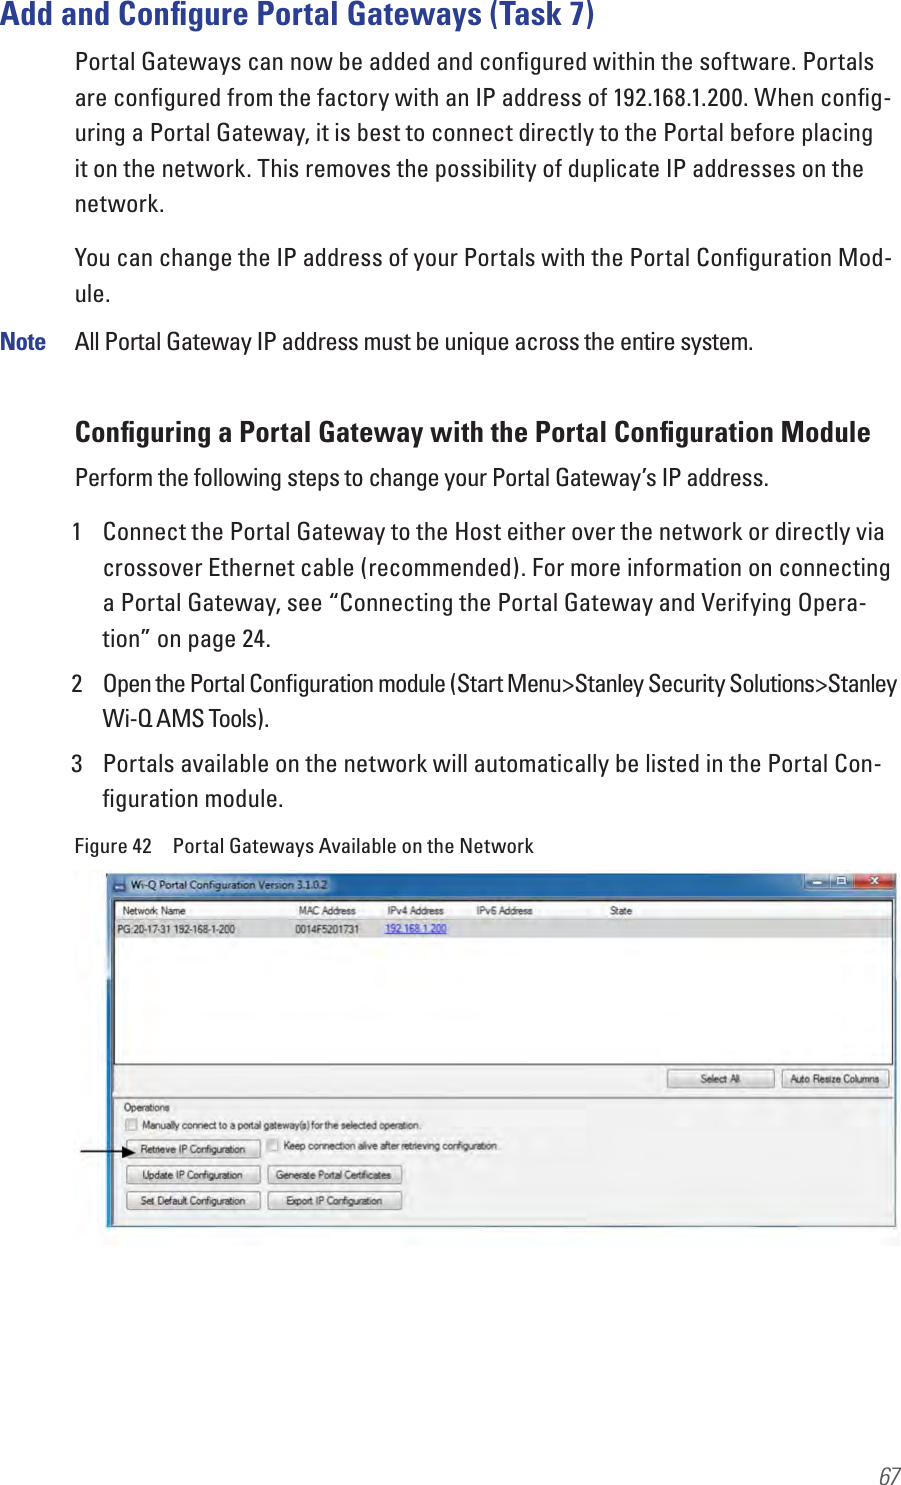 67Add and Conﬁgure Portal Gateways (Task 7)Portal Gateways can now be added and conﬁgured within the software. Portals are conﬁgured from the factory with an IP address of 192.168.1.200. When conﬁg-uring a Portal Gateway, it is best to connect directly to the Portal before placing it on the network. This removes the possibility of duplicate IP addresses on the network.You can change the IP address of your Portals with the Portal Conﬁguration Mod-ule.Note  All Portal Gateway IP address must be unique across the entire system.Conﬁguring a Portal Gateway with the Portal Conﬁguration ModulePerform the following steps to change your Portal Gateway’s IP address.1  Connect the Portal Gateway to the Host either over the network or directly via crossover Ethernet cable (recommended). For more information on connecting a Portal Gateway, see “Connecting the Portal Gateway and Verifying Opera-tion” on page 24.2  Open the Portal Conﬁguration module (Start Menu&gt;Stanley Security Solutions&gt;Stanley Wi-Q AMS Tools).3  Portals available on the network will automatically be listed in the Portal Con-ﬁguration module.Figure 42  Portal Gateways Available on the Network